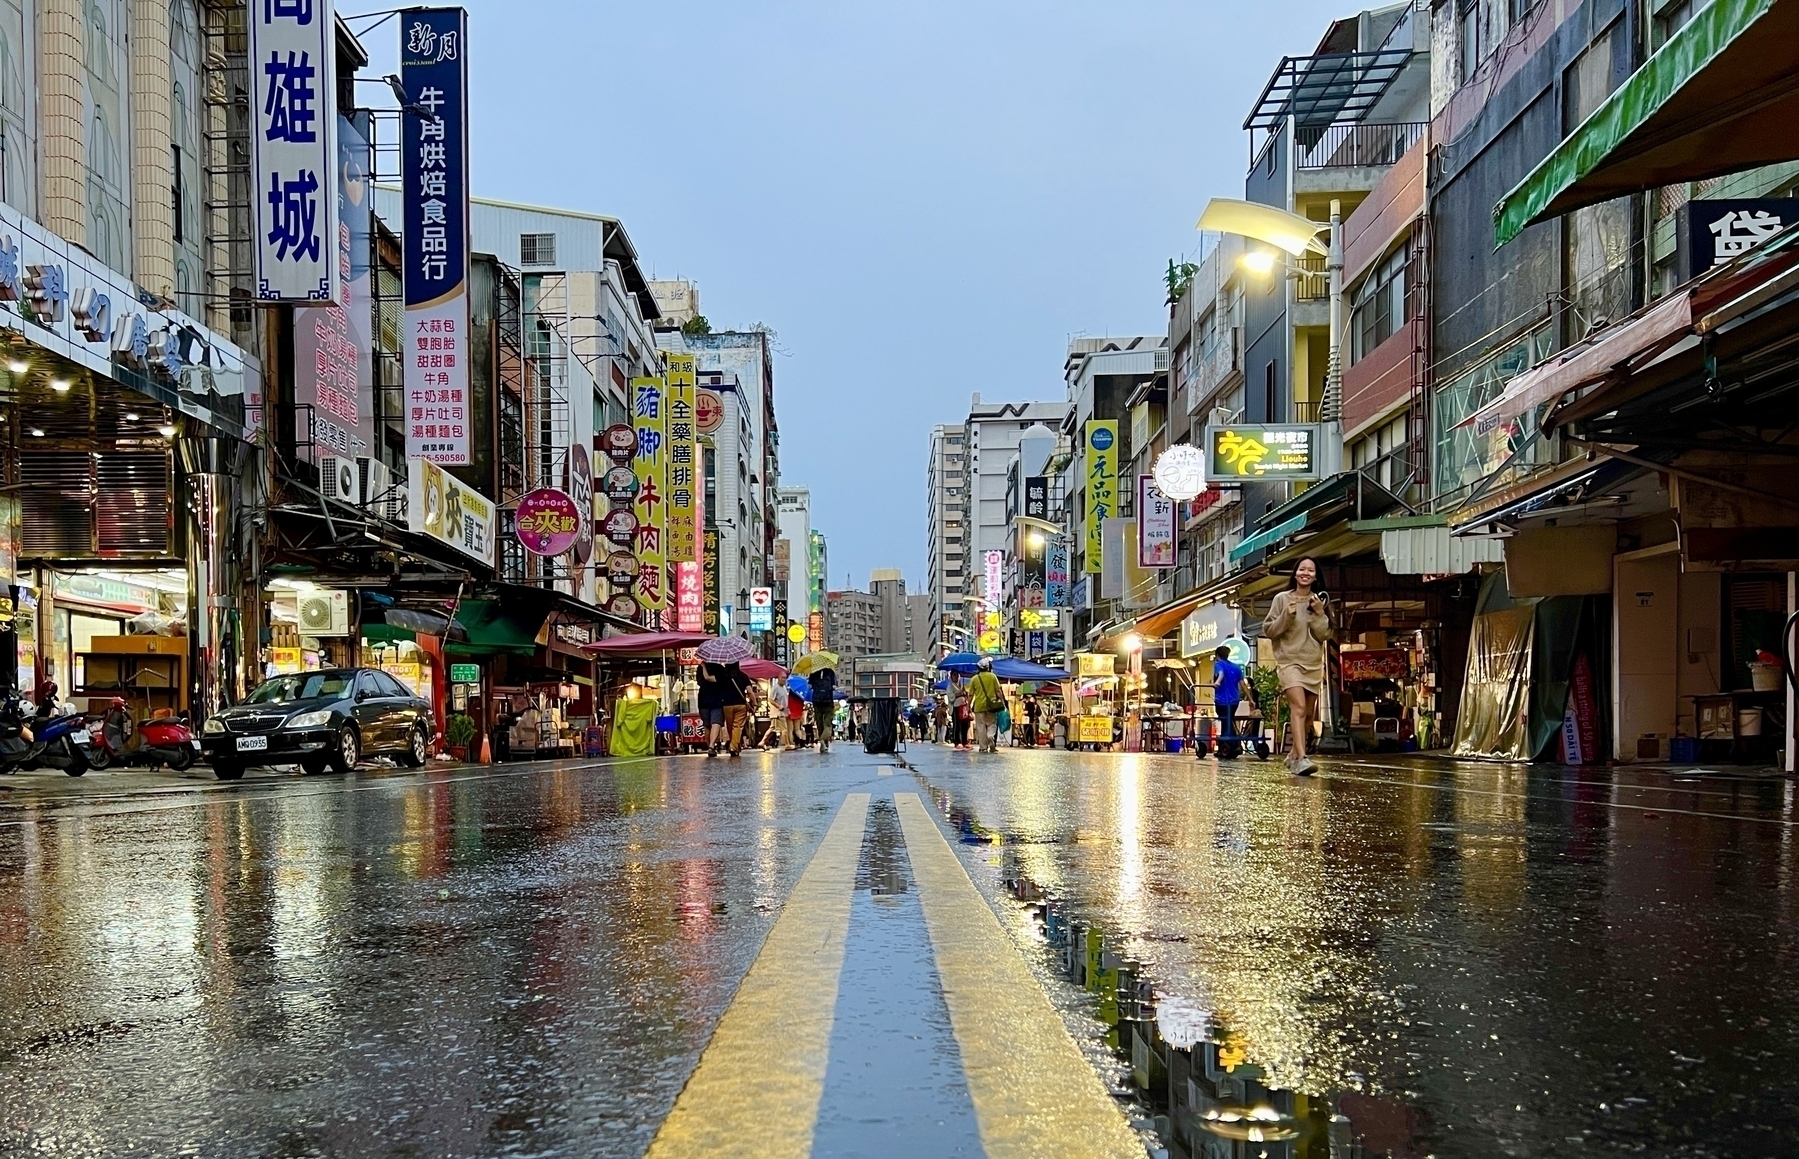 Low shot of a wet street in Kaohsiung. A few street carts are setting up on the edges